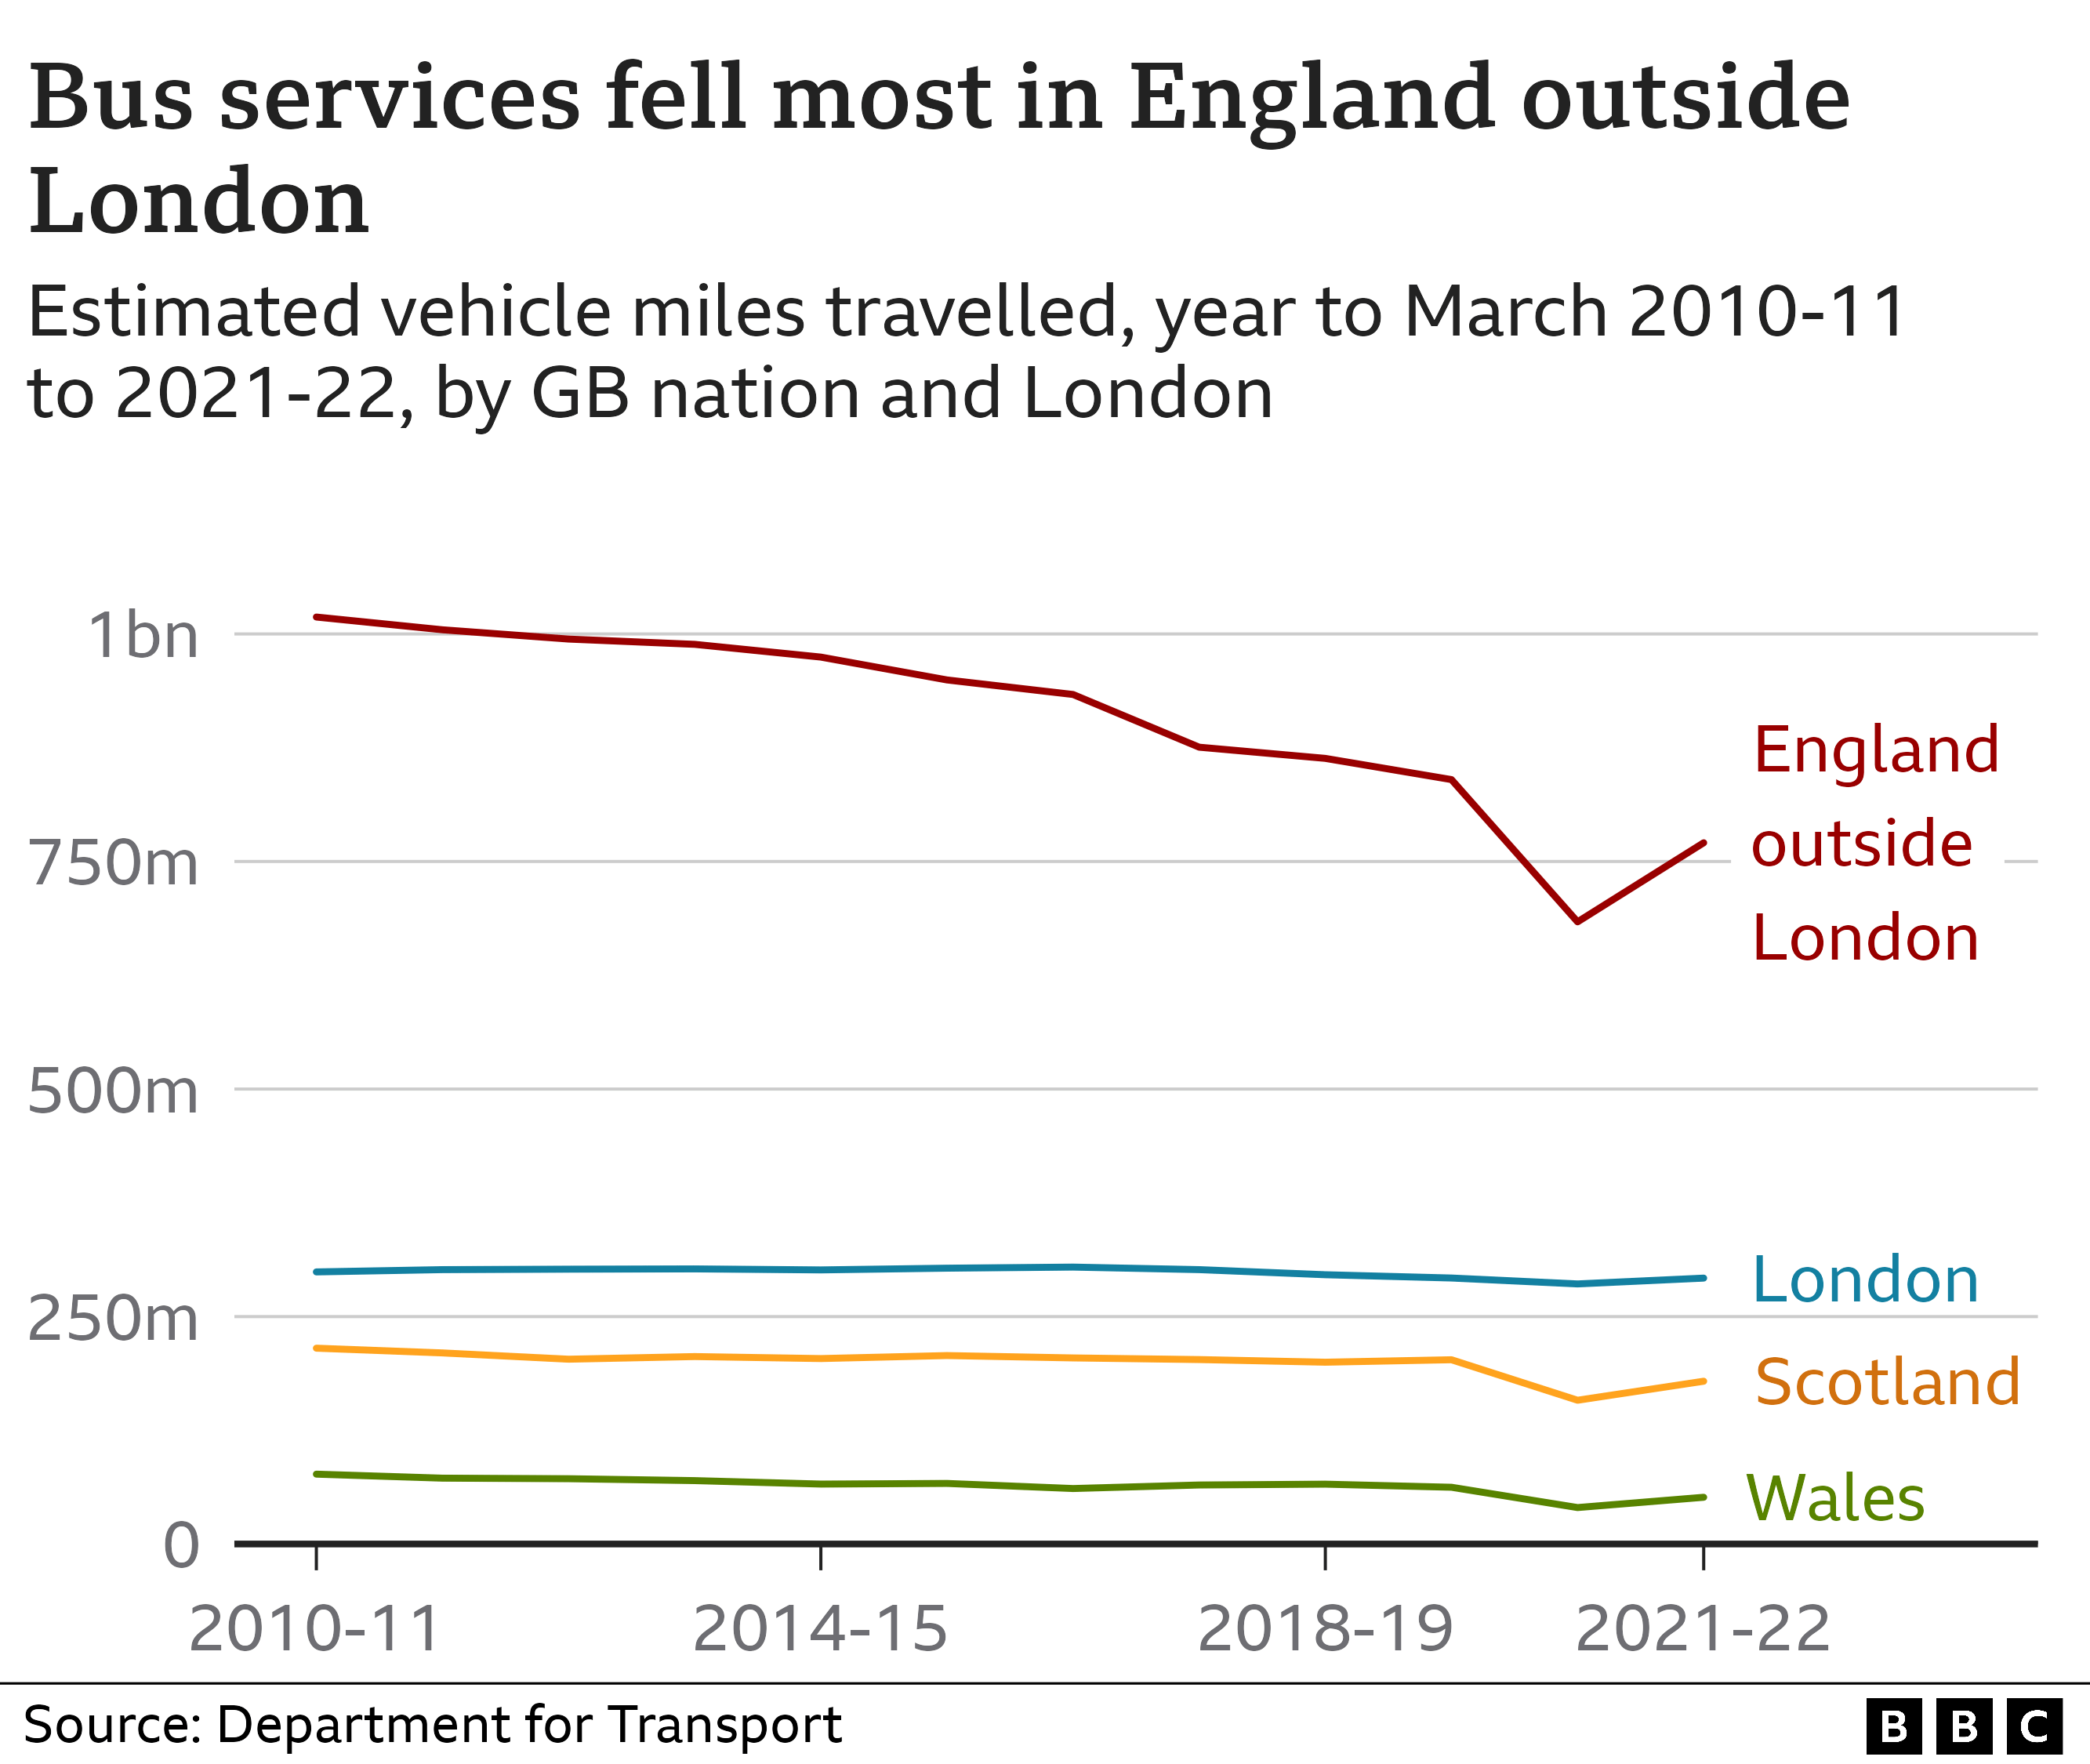 A line chart showing the estimated vehicle miles travelled by buses in England outside London, London, Wales and Scotland between March 2010 and March 2022. There is a downward trend for England outside London and a slow decline for the rest, with a brief sharp downturn in 2020 due to the pandemic, before moving back to a lower level than pre-pandemic for England outside London. In London the trend stays stable at about 300 million miles, in Wales it drops from 72 million to 50 million, Scotland it drops from 220 million to 179 million and in England outside London it drops from just over a billion miles to 770 million